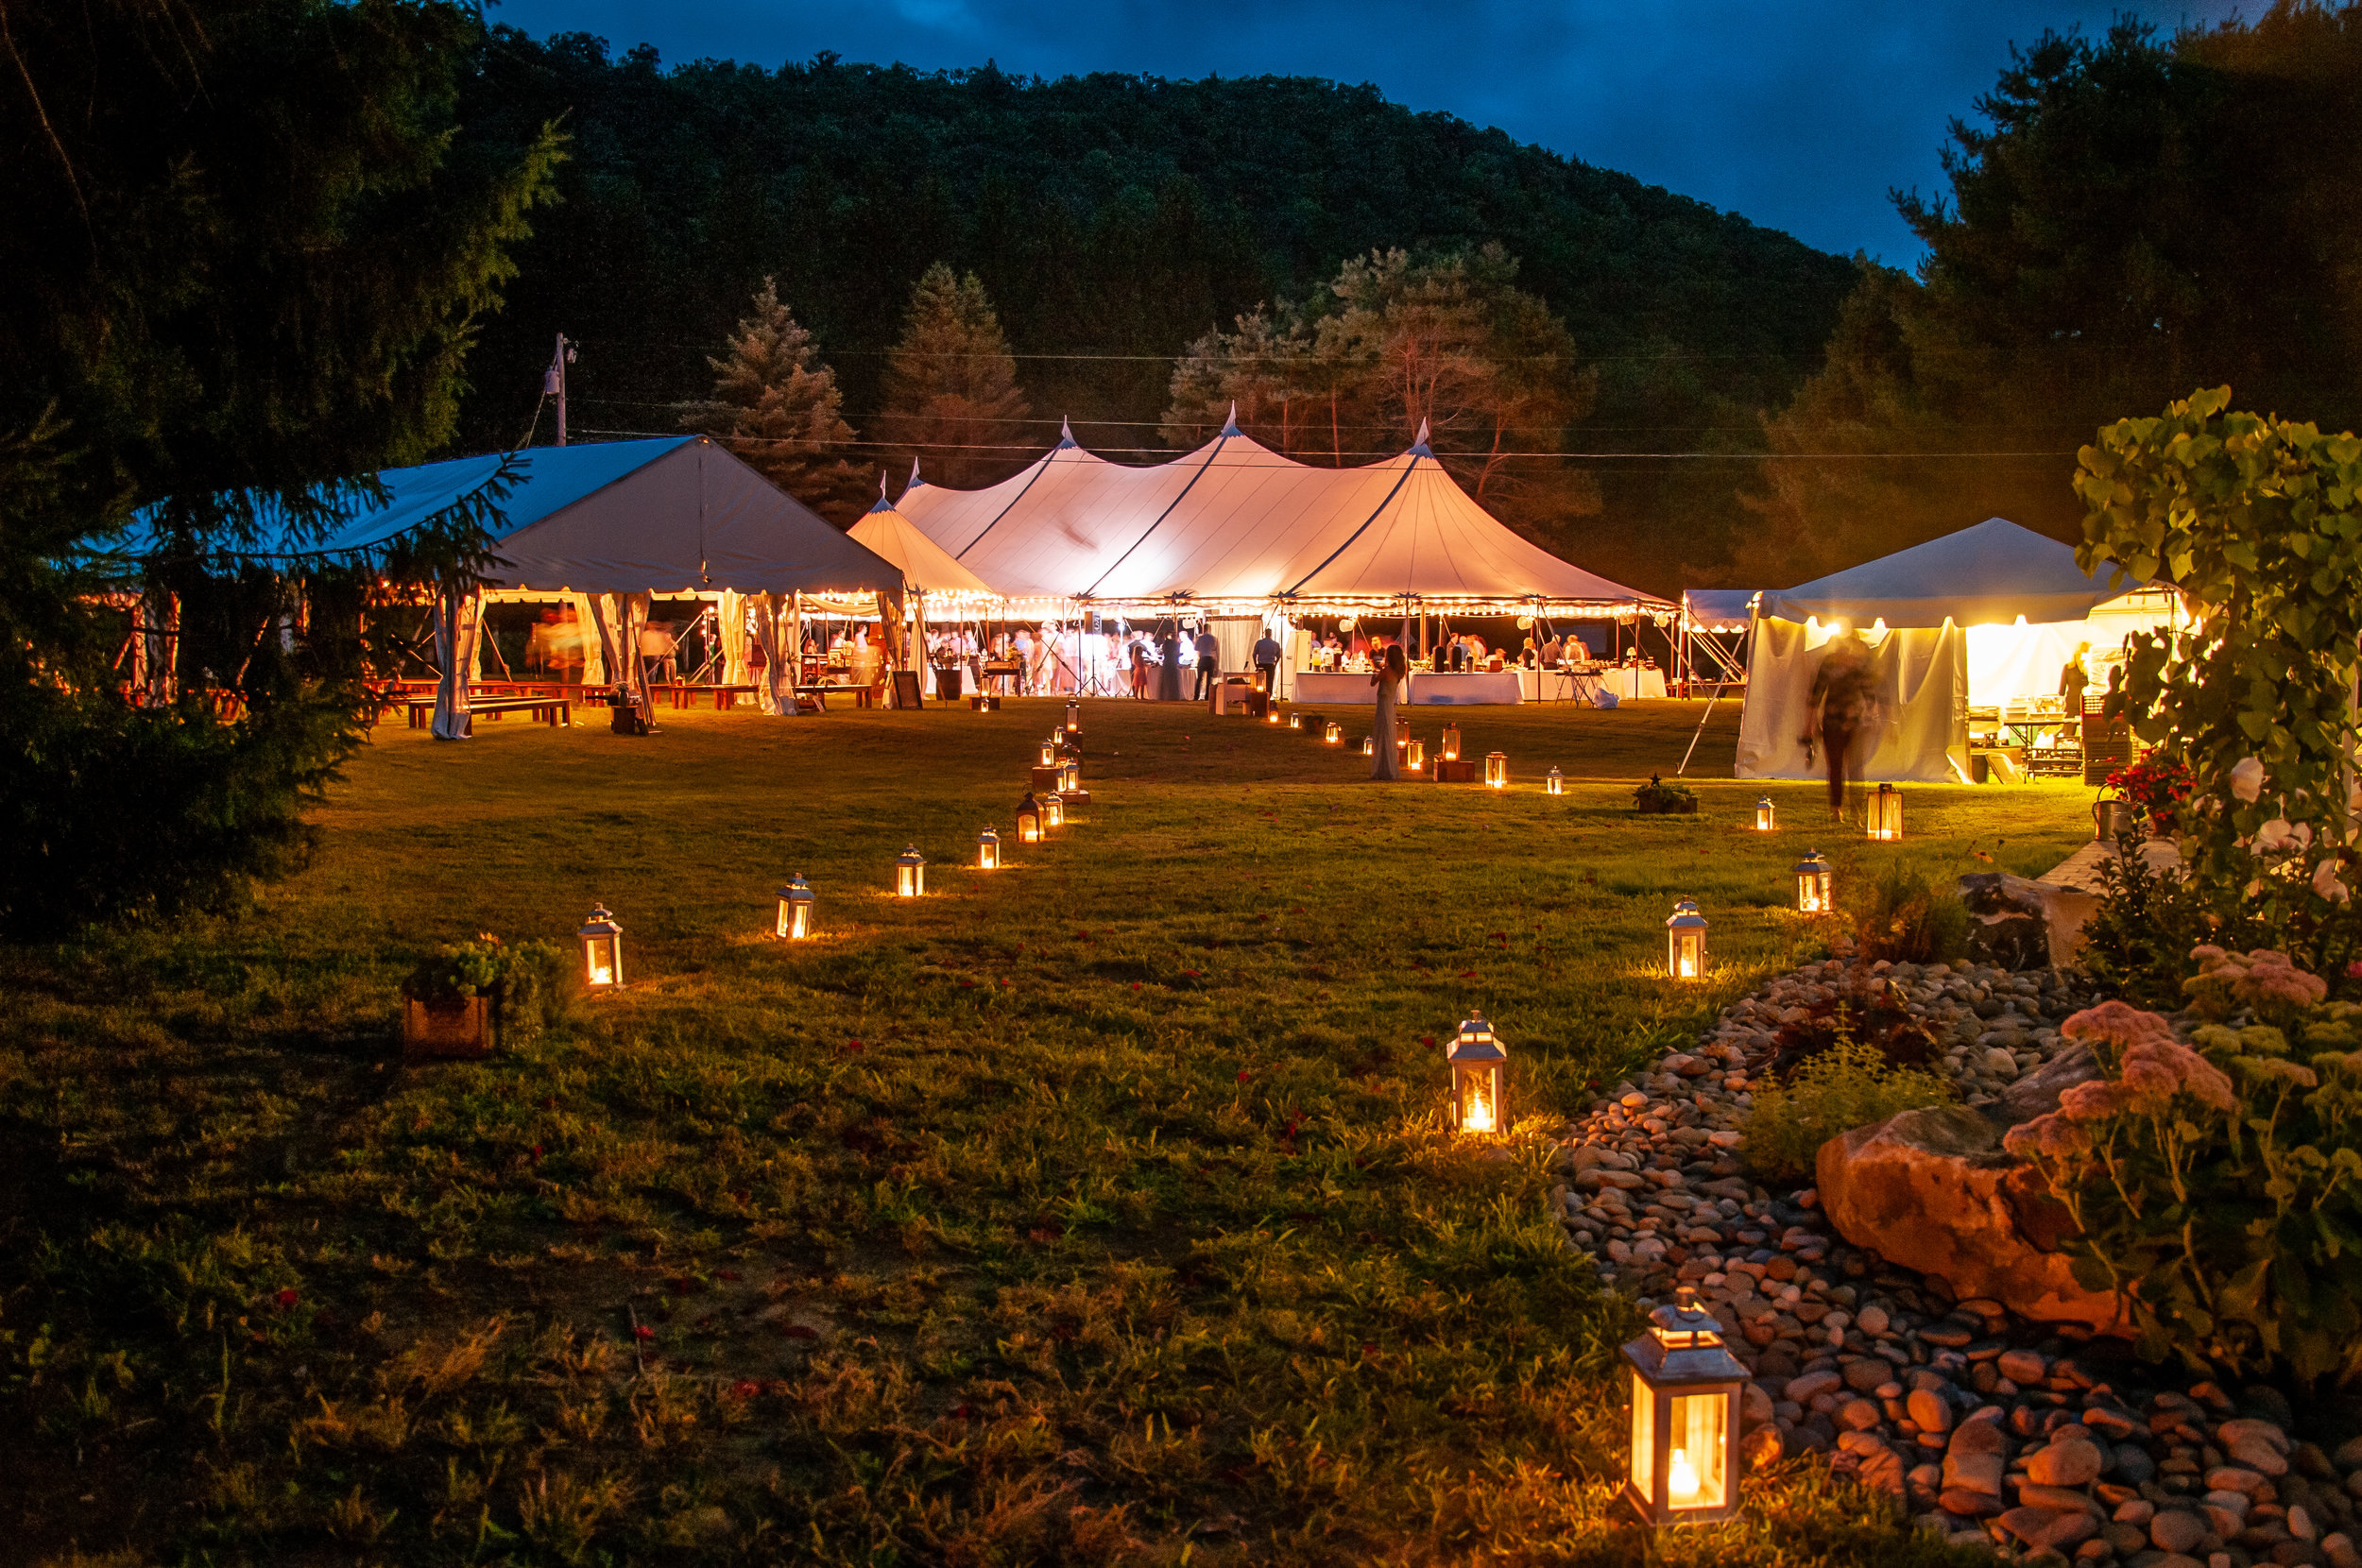 Outdoor wedding in a rustic sailcloth tent